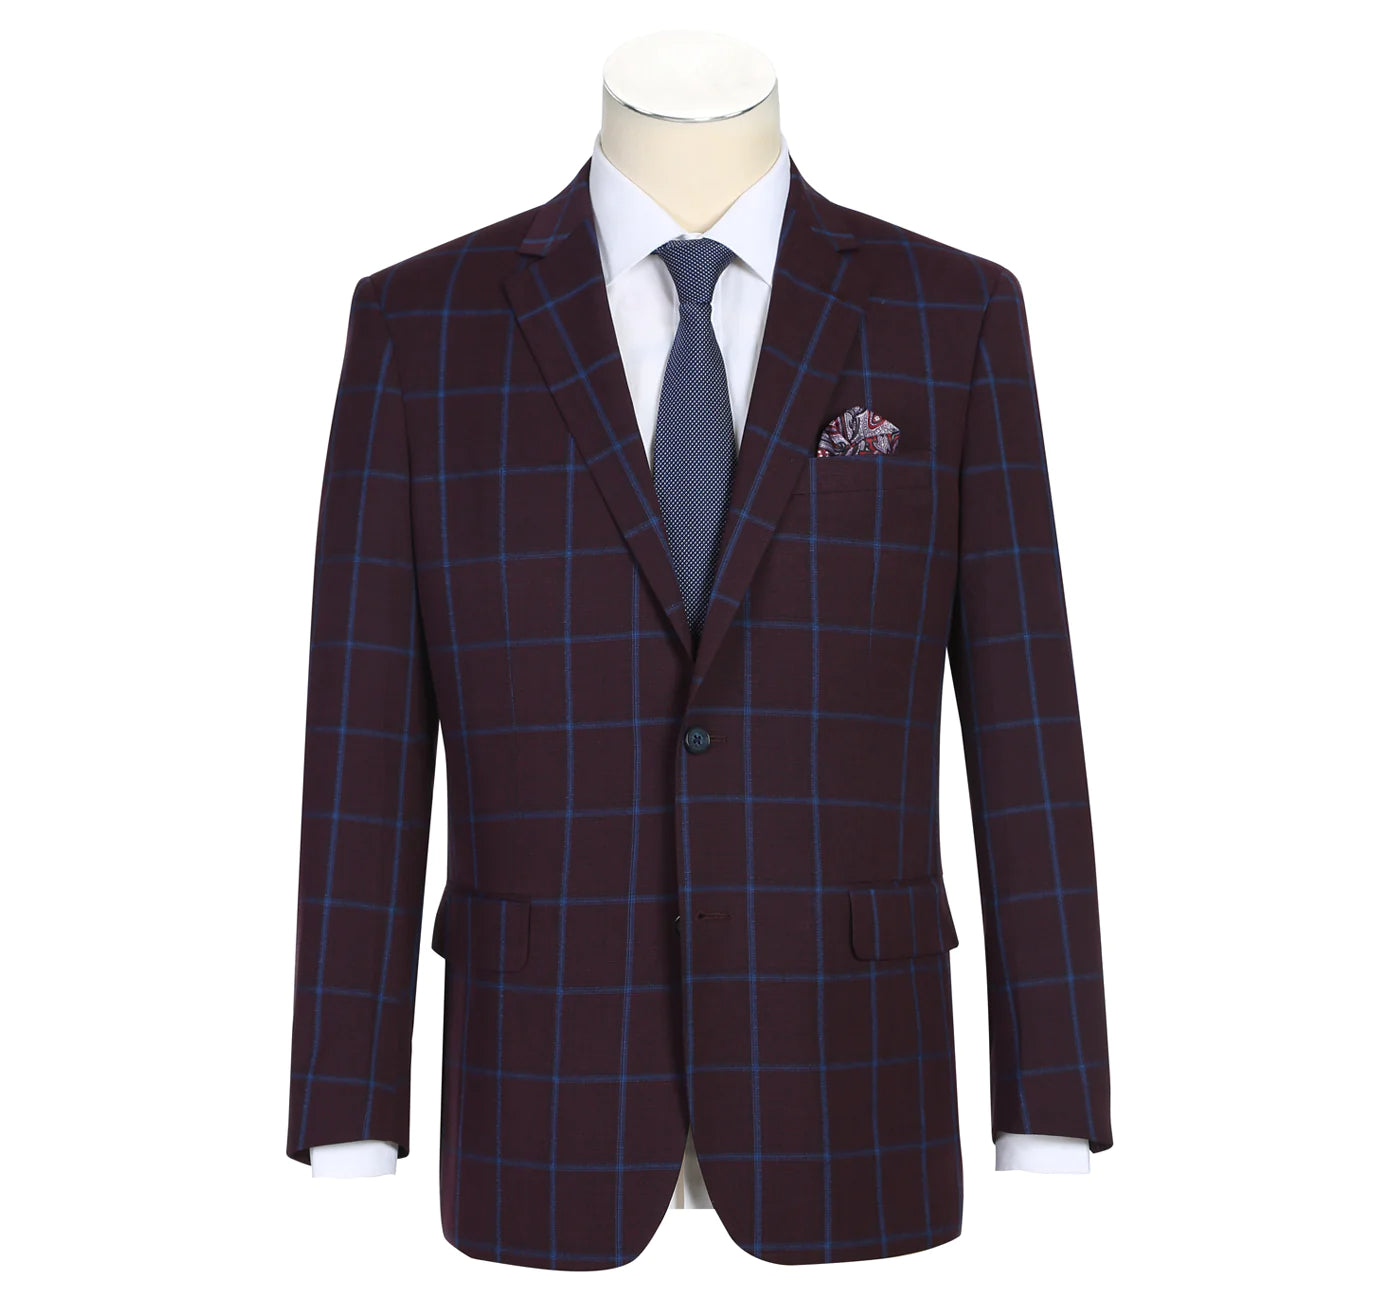 Men's Slim Fit Two Button Burgundy with Blue Check Blazer Sportcoat